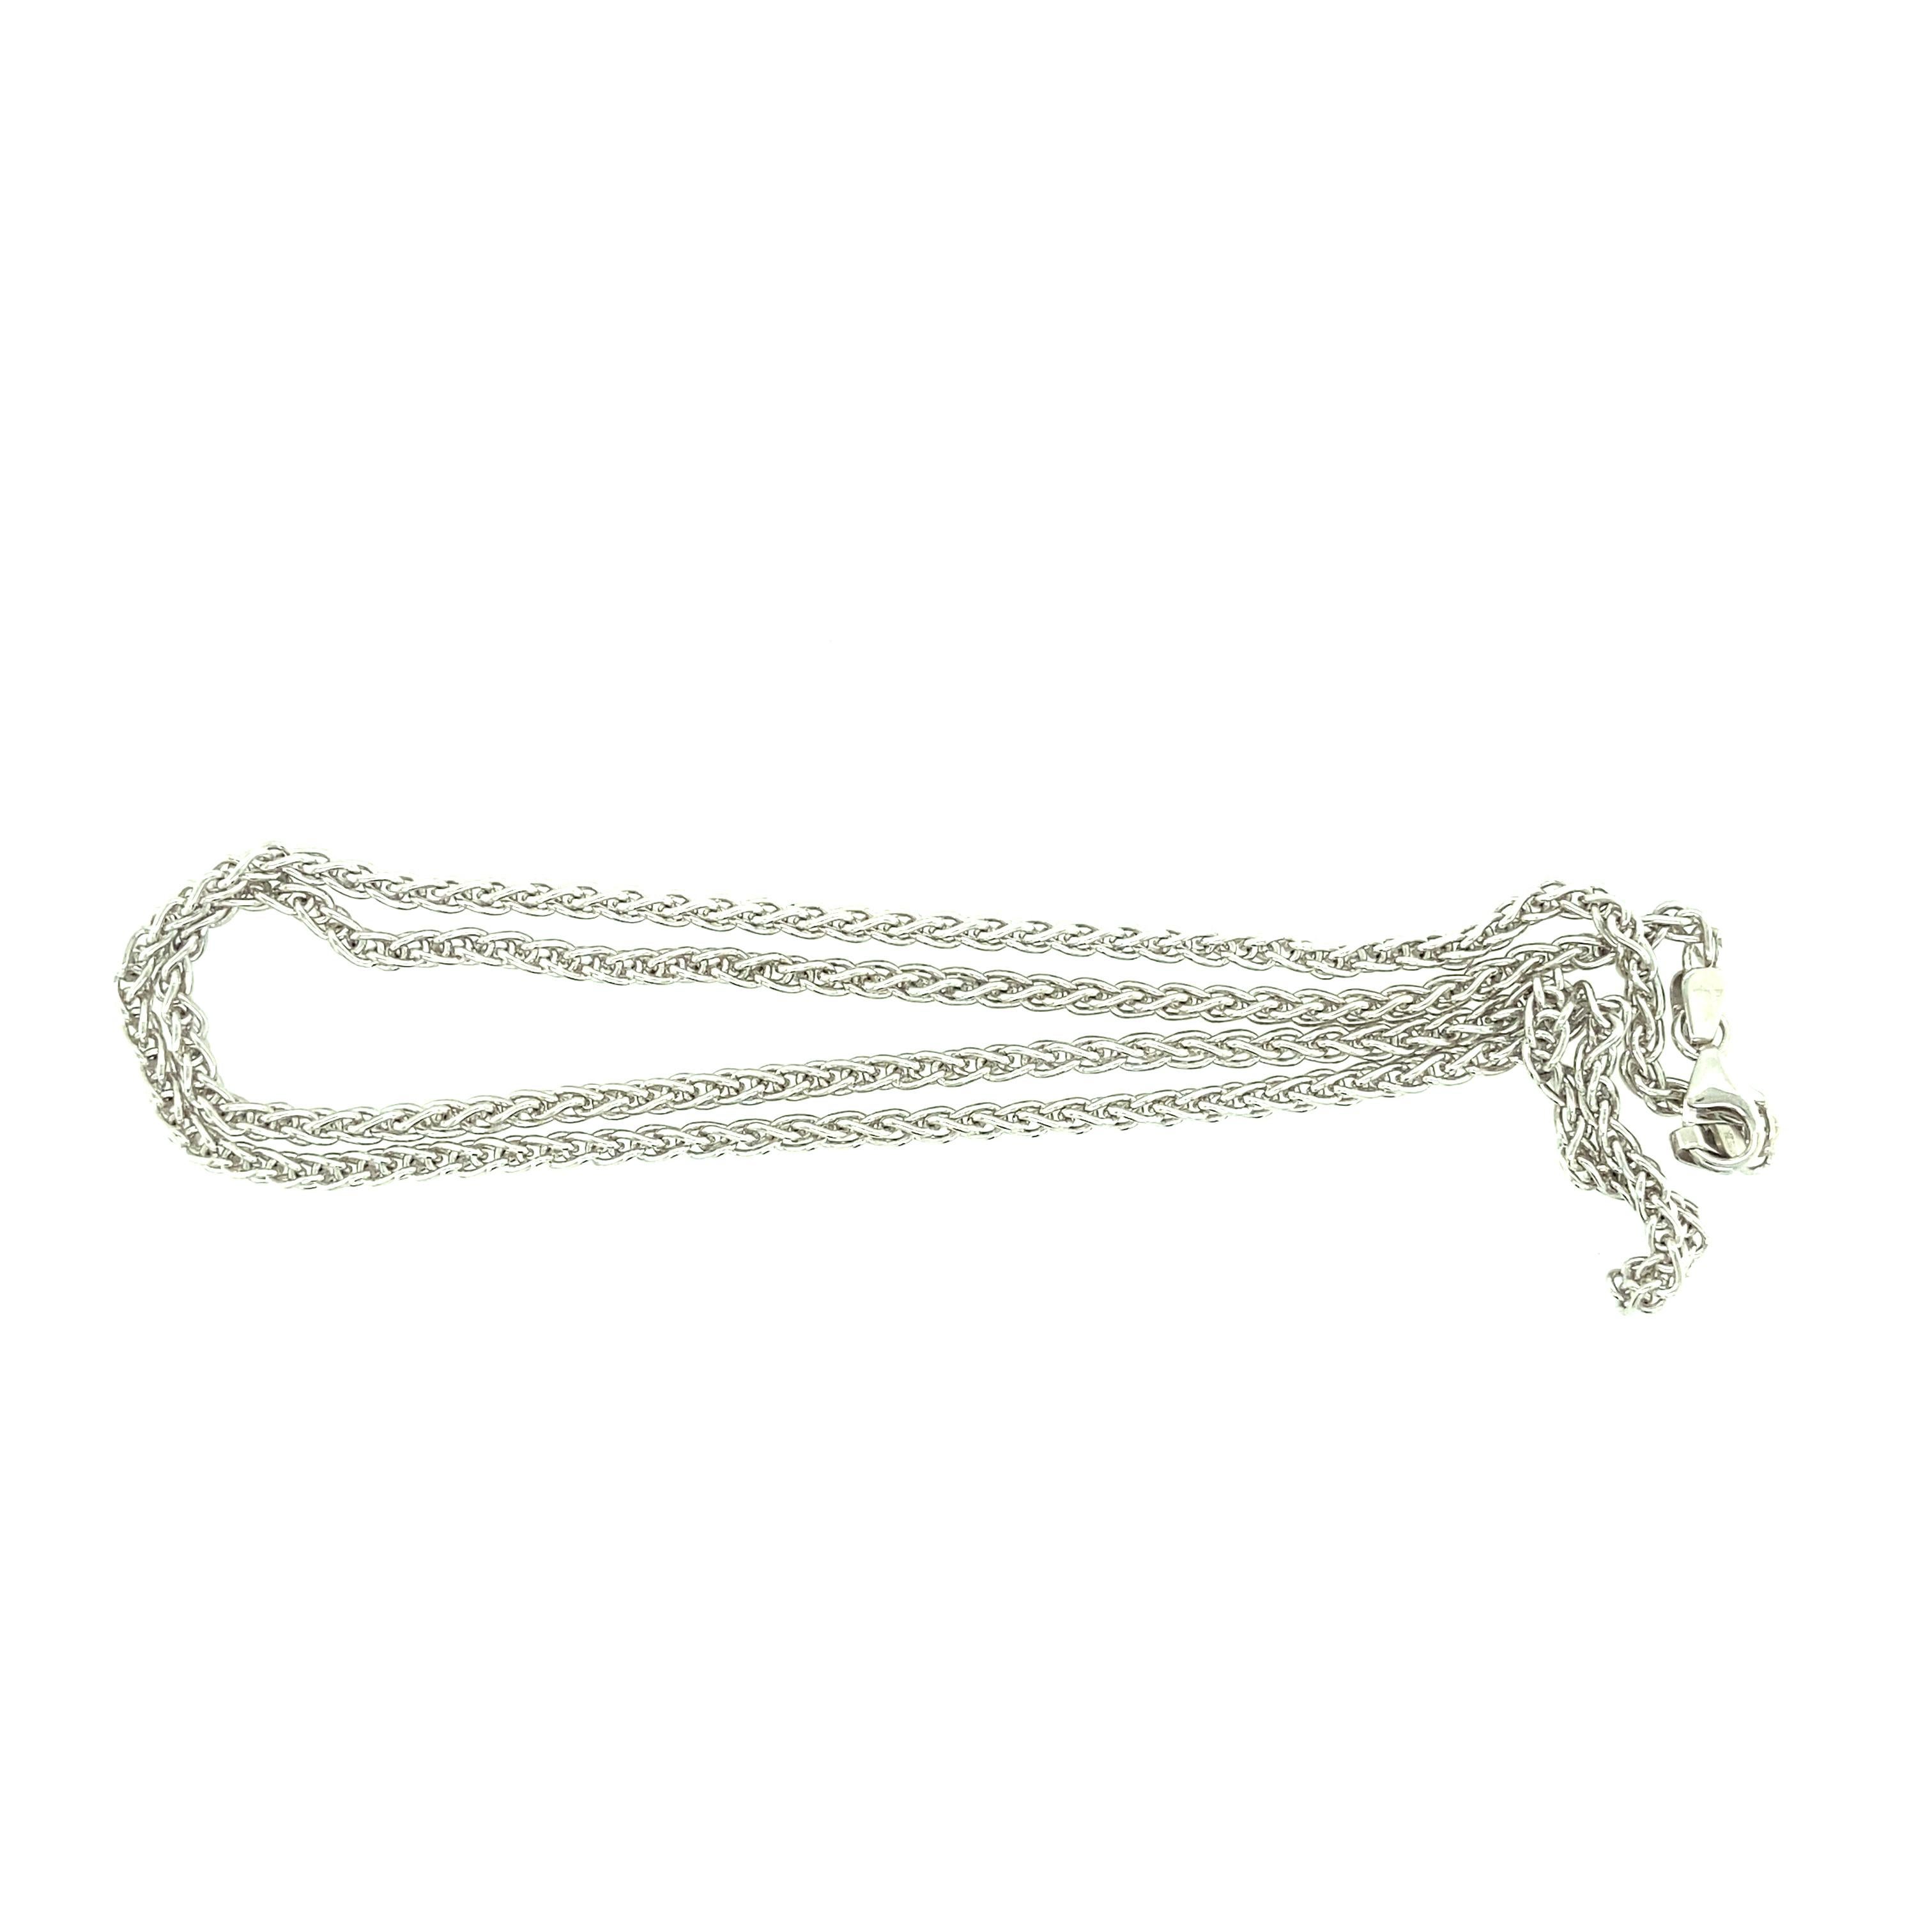 One 14 karat white gold (stamped 14KT ITALY) estate fox tail chain measuring 20 inches in length with a lobster clasp. The necklace weights 12.06 grams.  